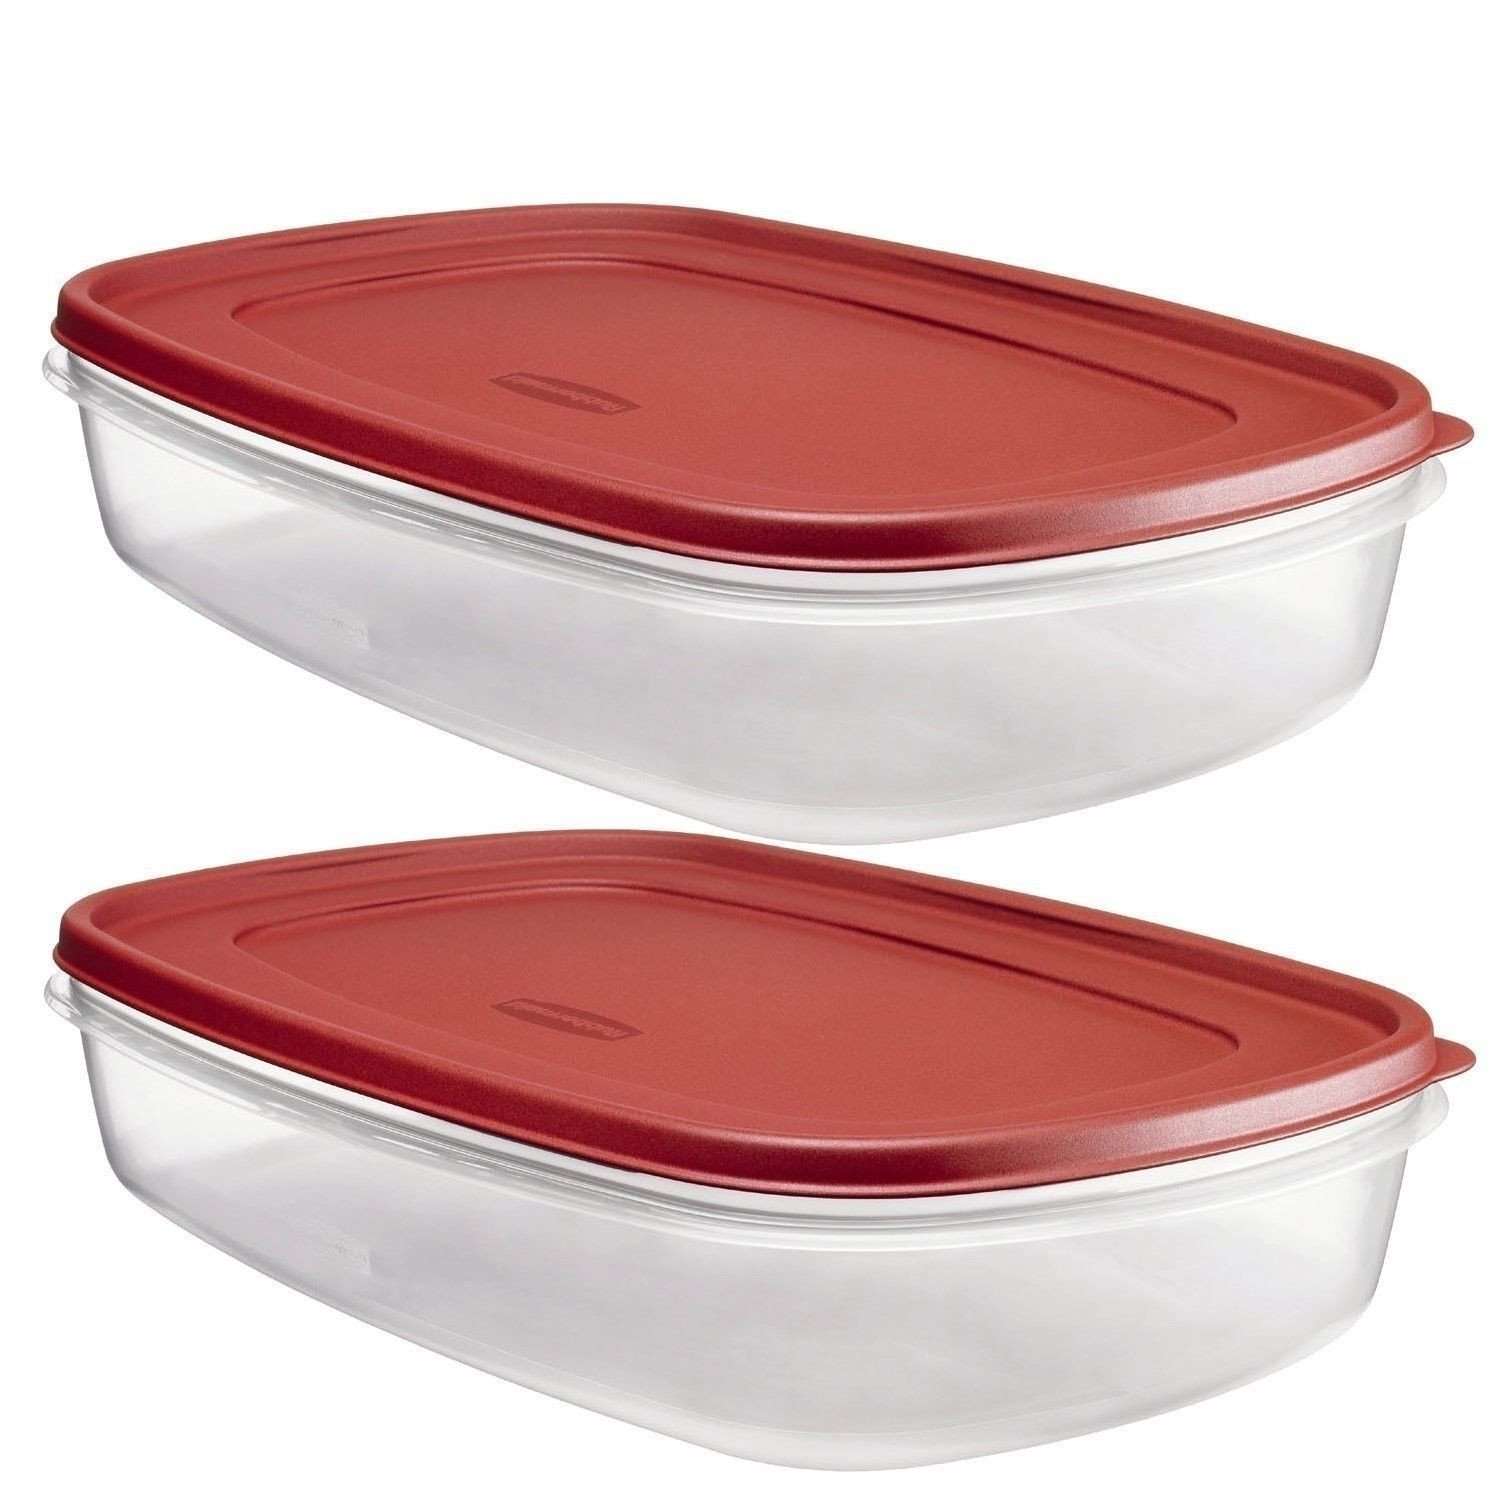 Easy пластик. Rubbermaid контейнер термо. Rubbermaid пластиковый. Lid Container.